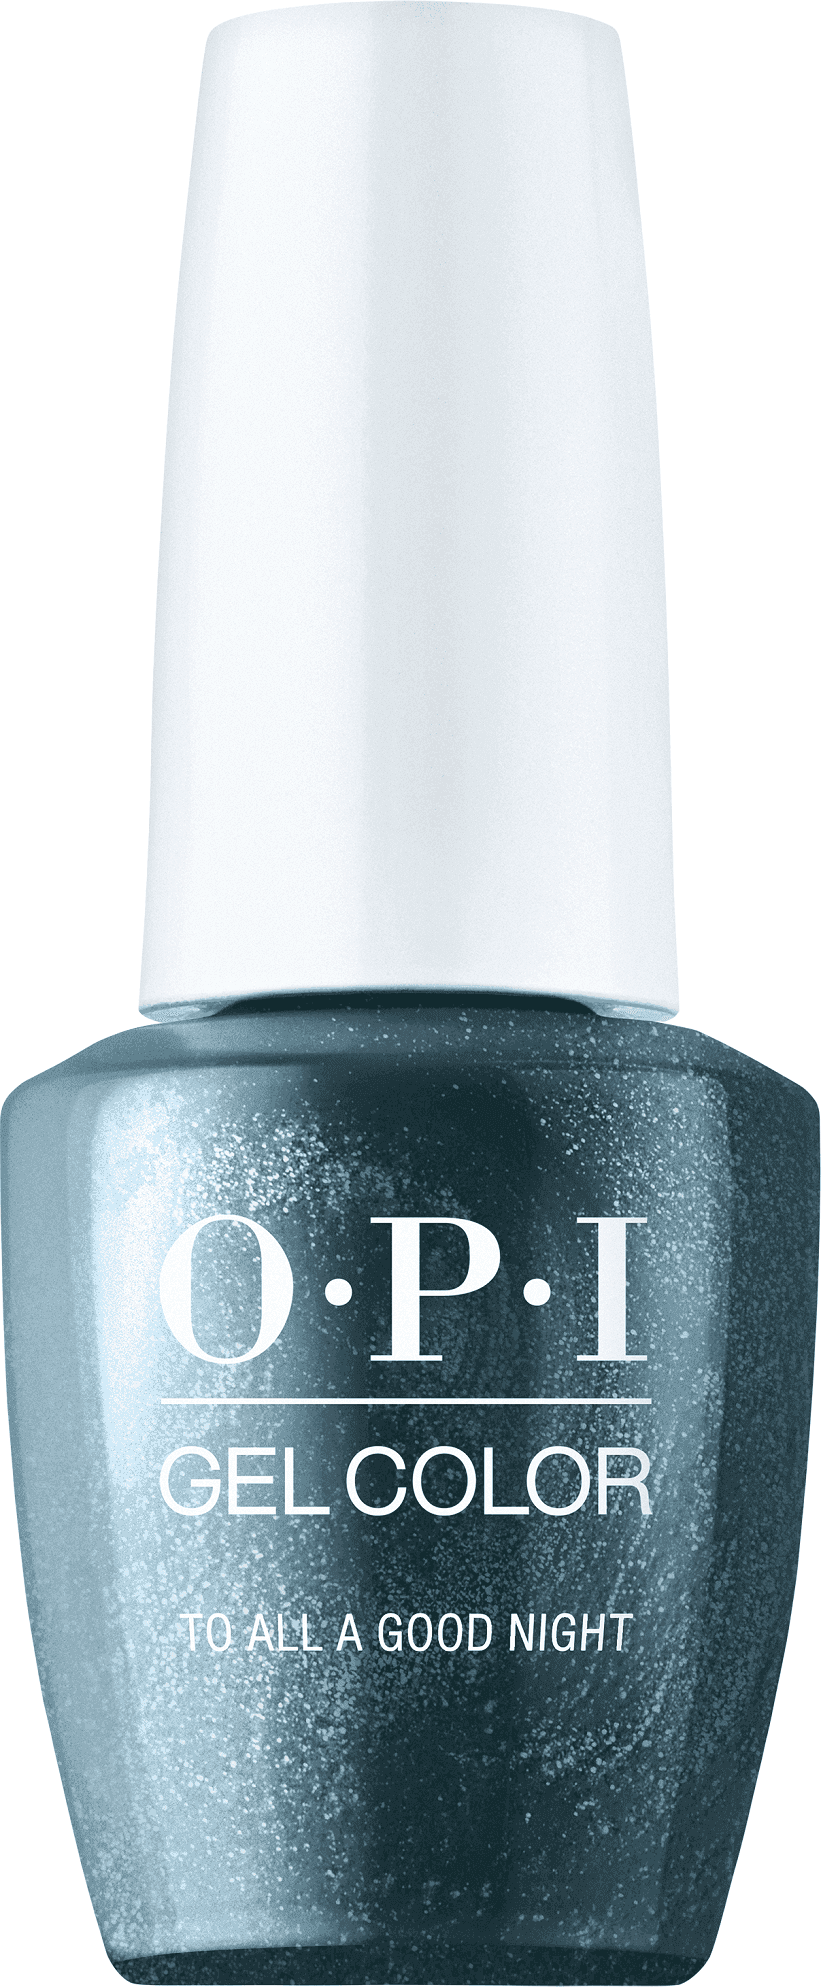 OPI GelColor - To All a Good Night - GCM11